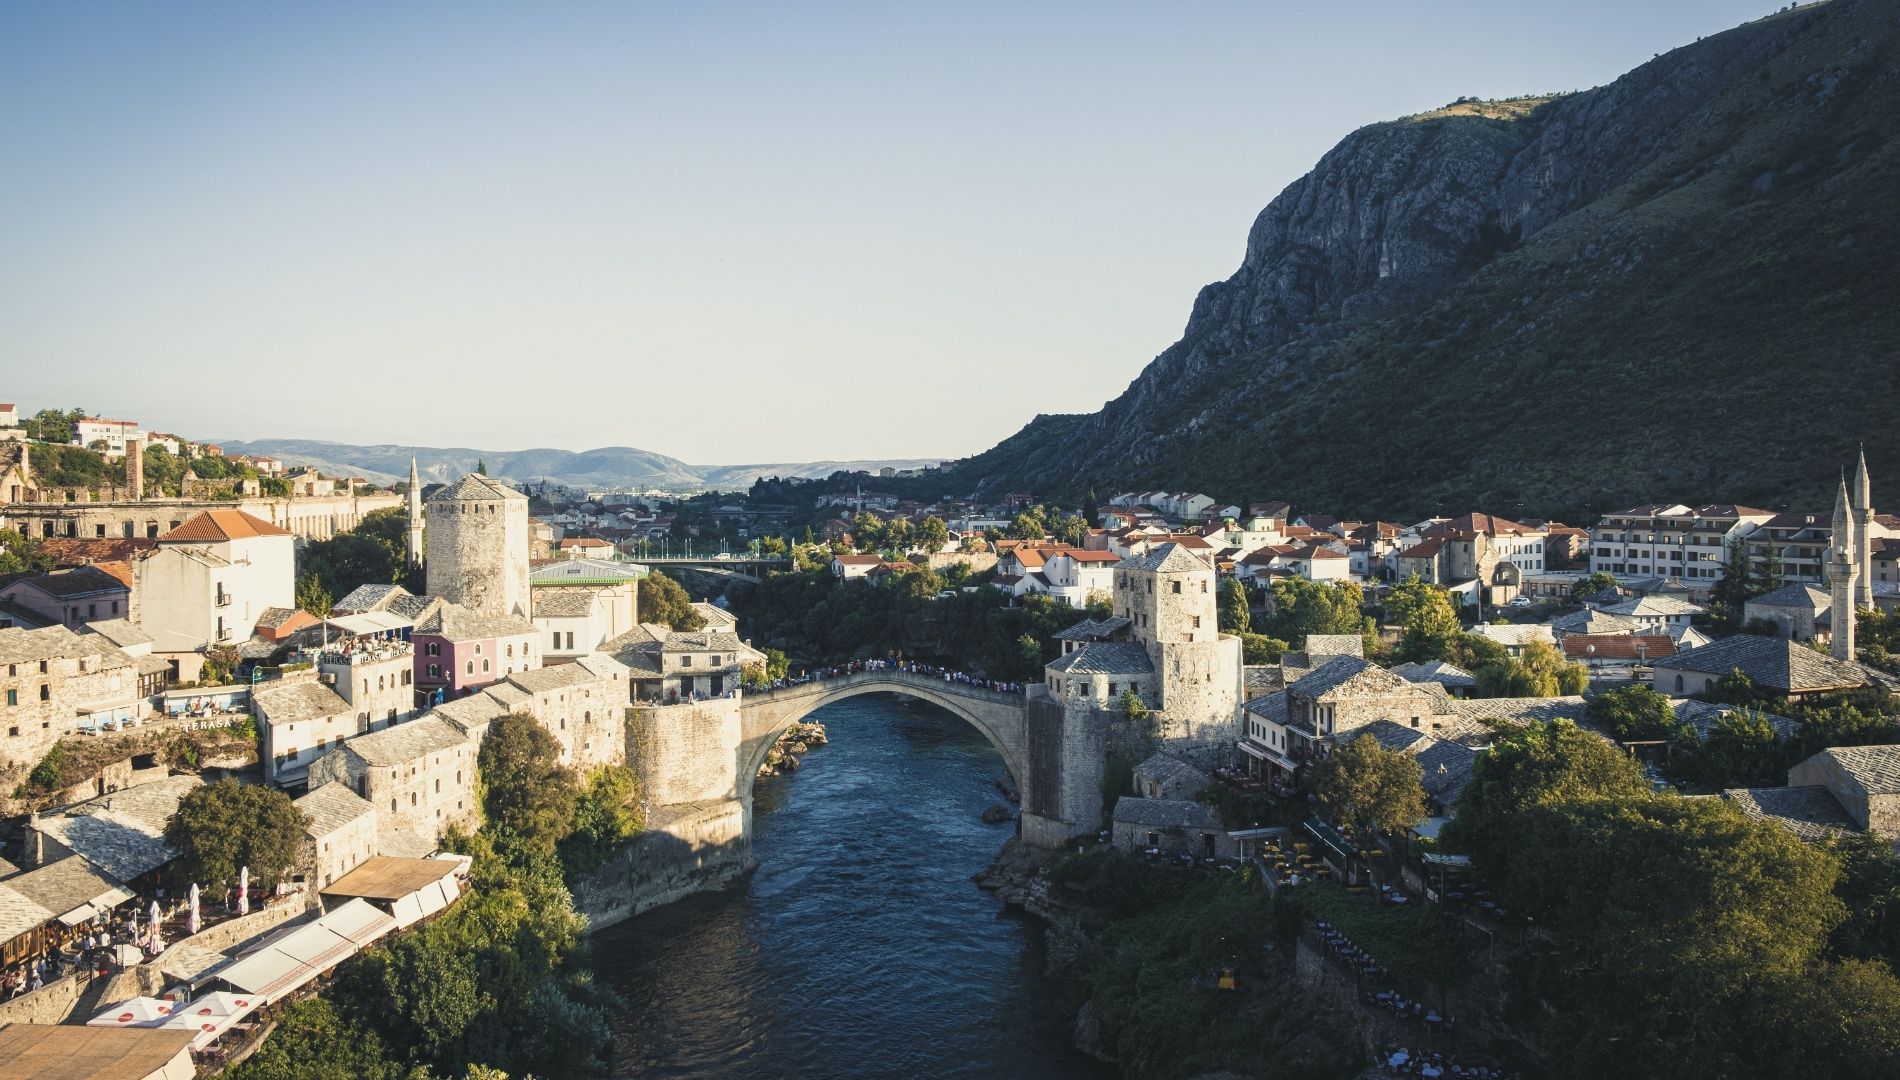 Most romantic places on the earth: Mostar 